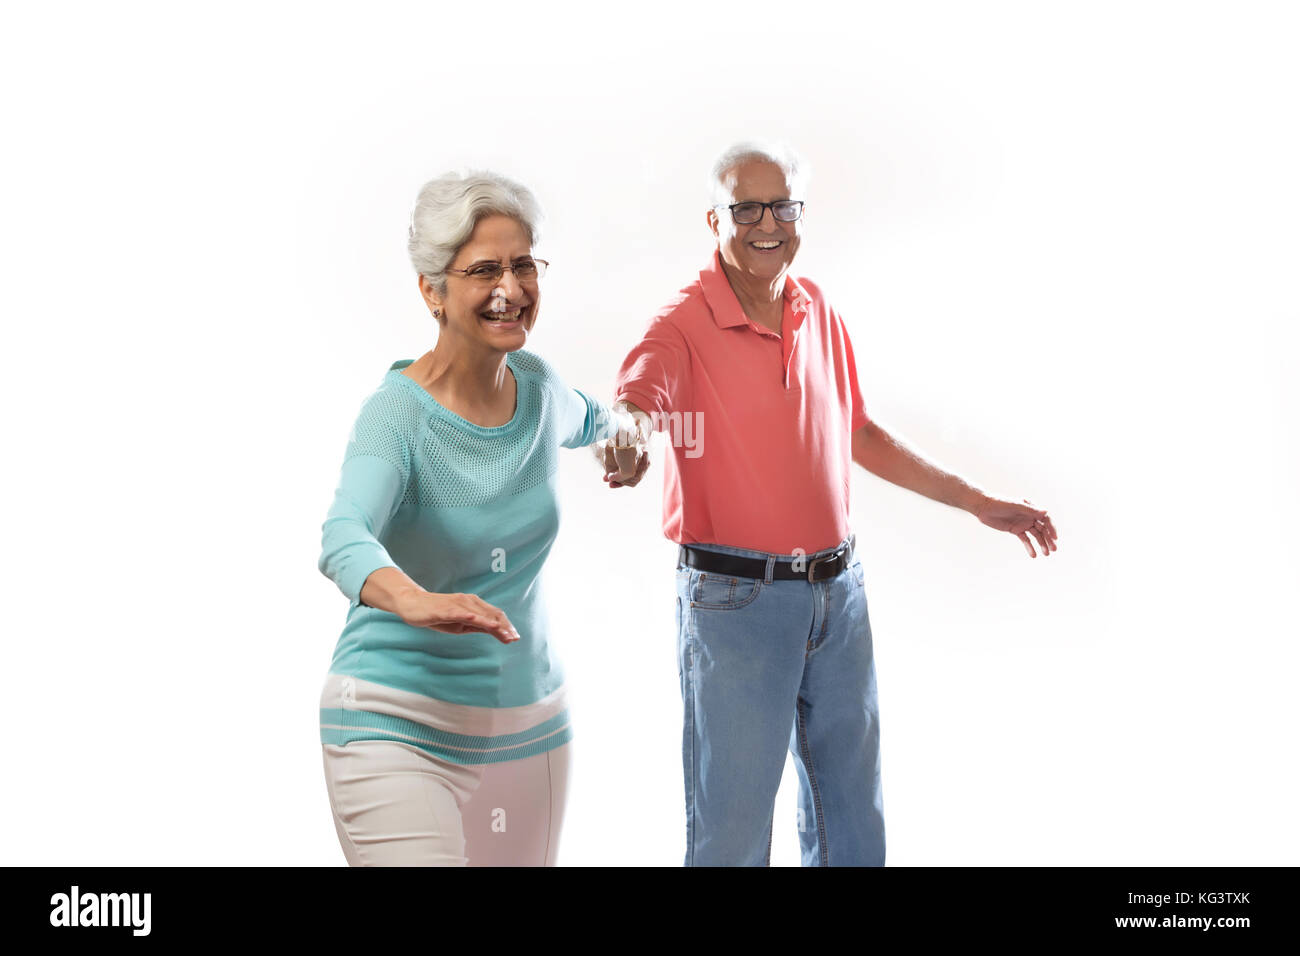 Happy senior couple holding hands and dancing Stock Photo